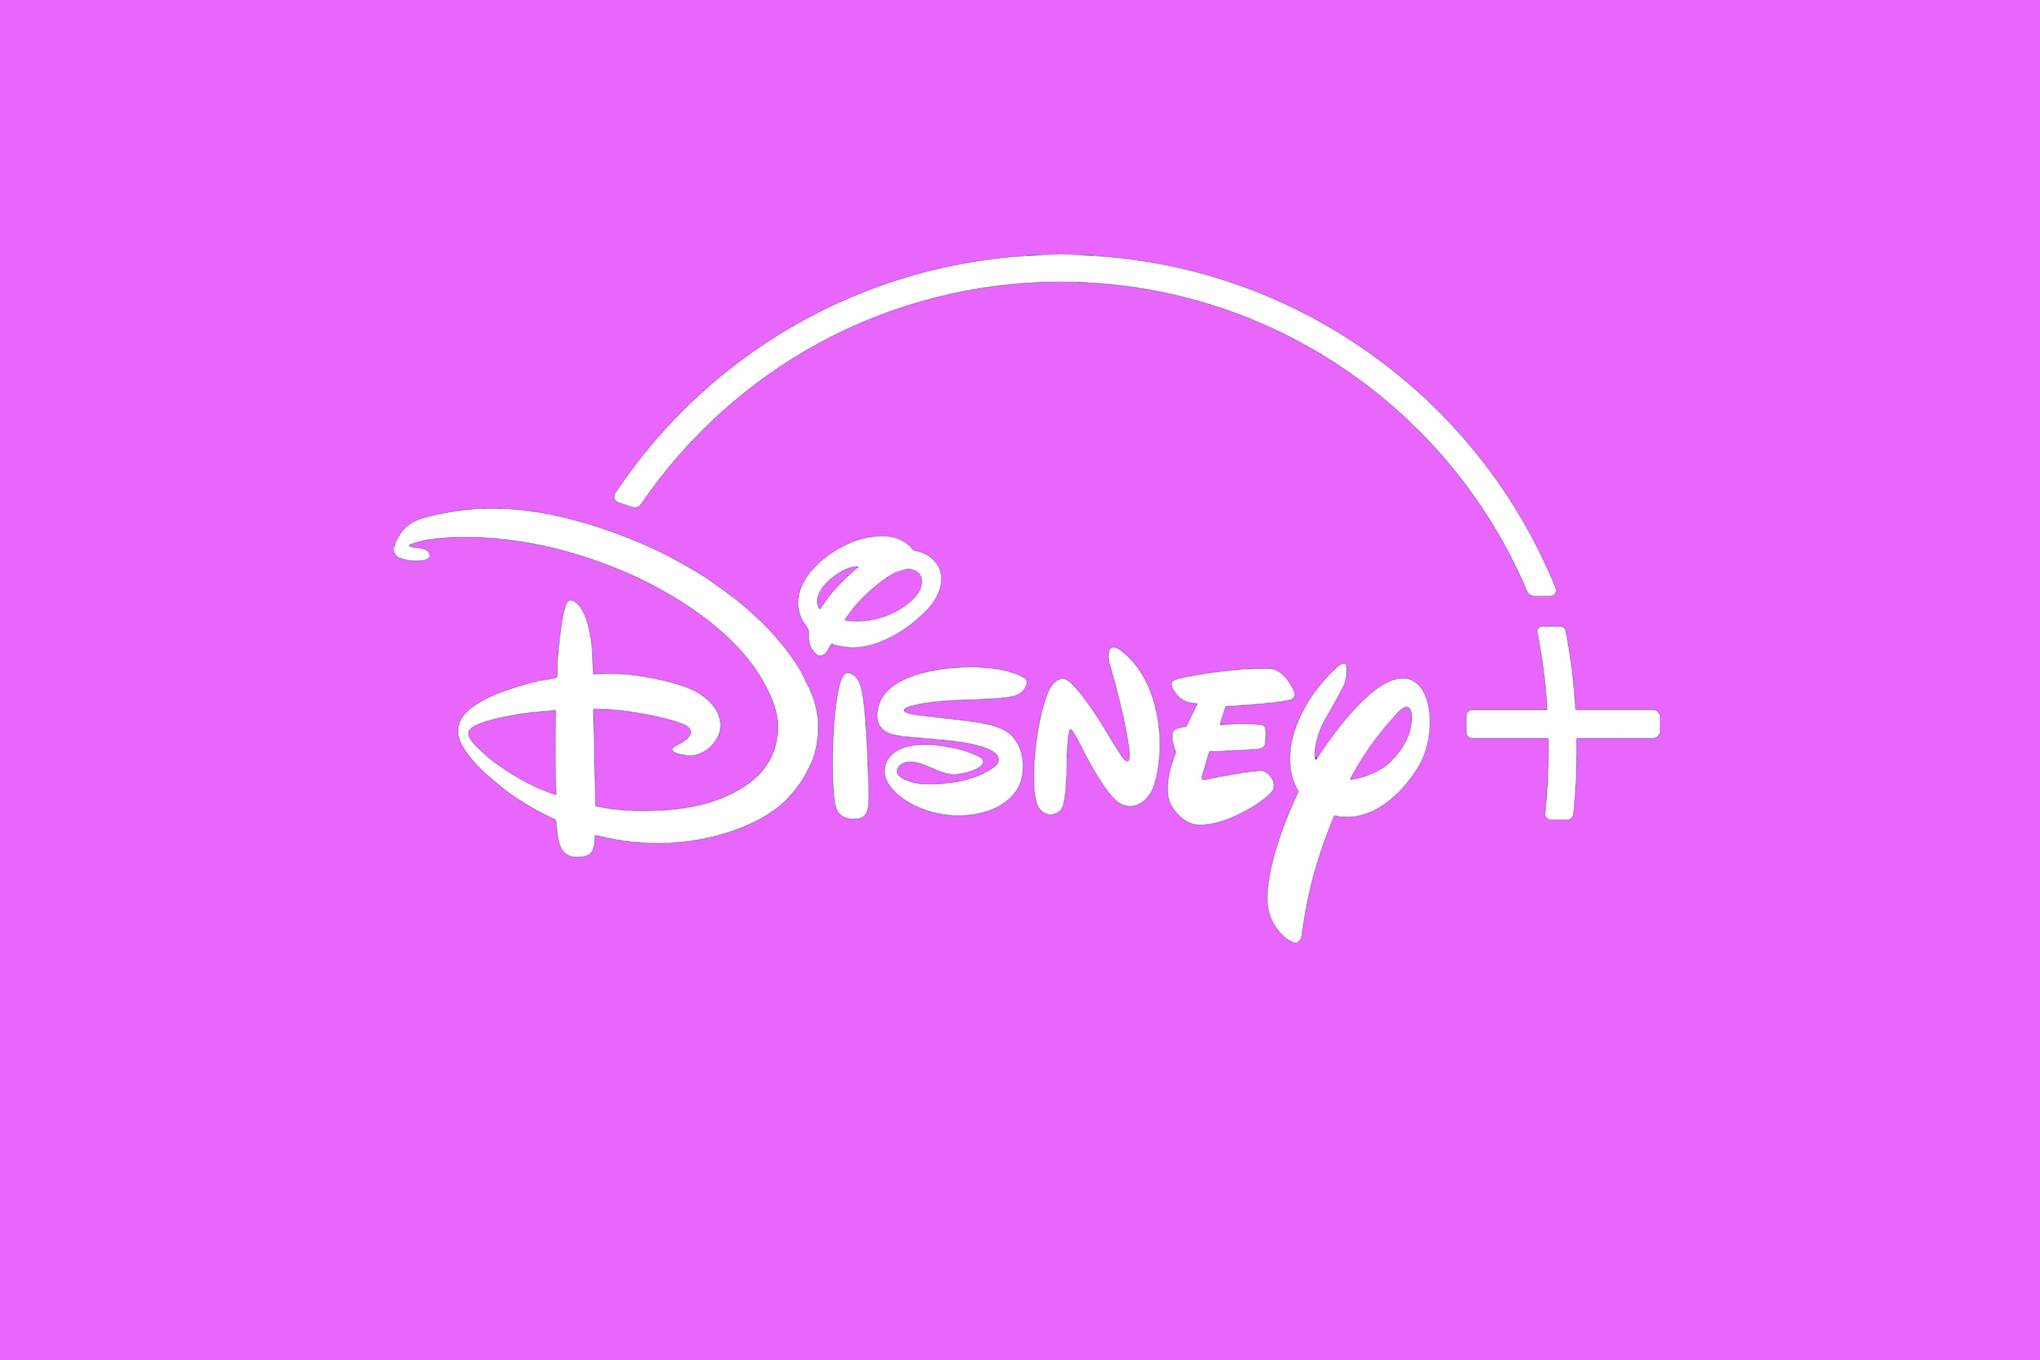 How To Get Disney On Your Smart Tv Phone And Laptop Wired Uk For other, more specific purposes, the icon is also available for download in the following formats how to get disney on your smart tv